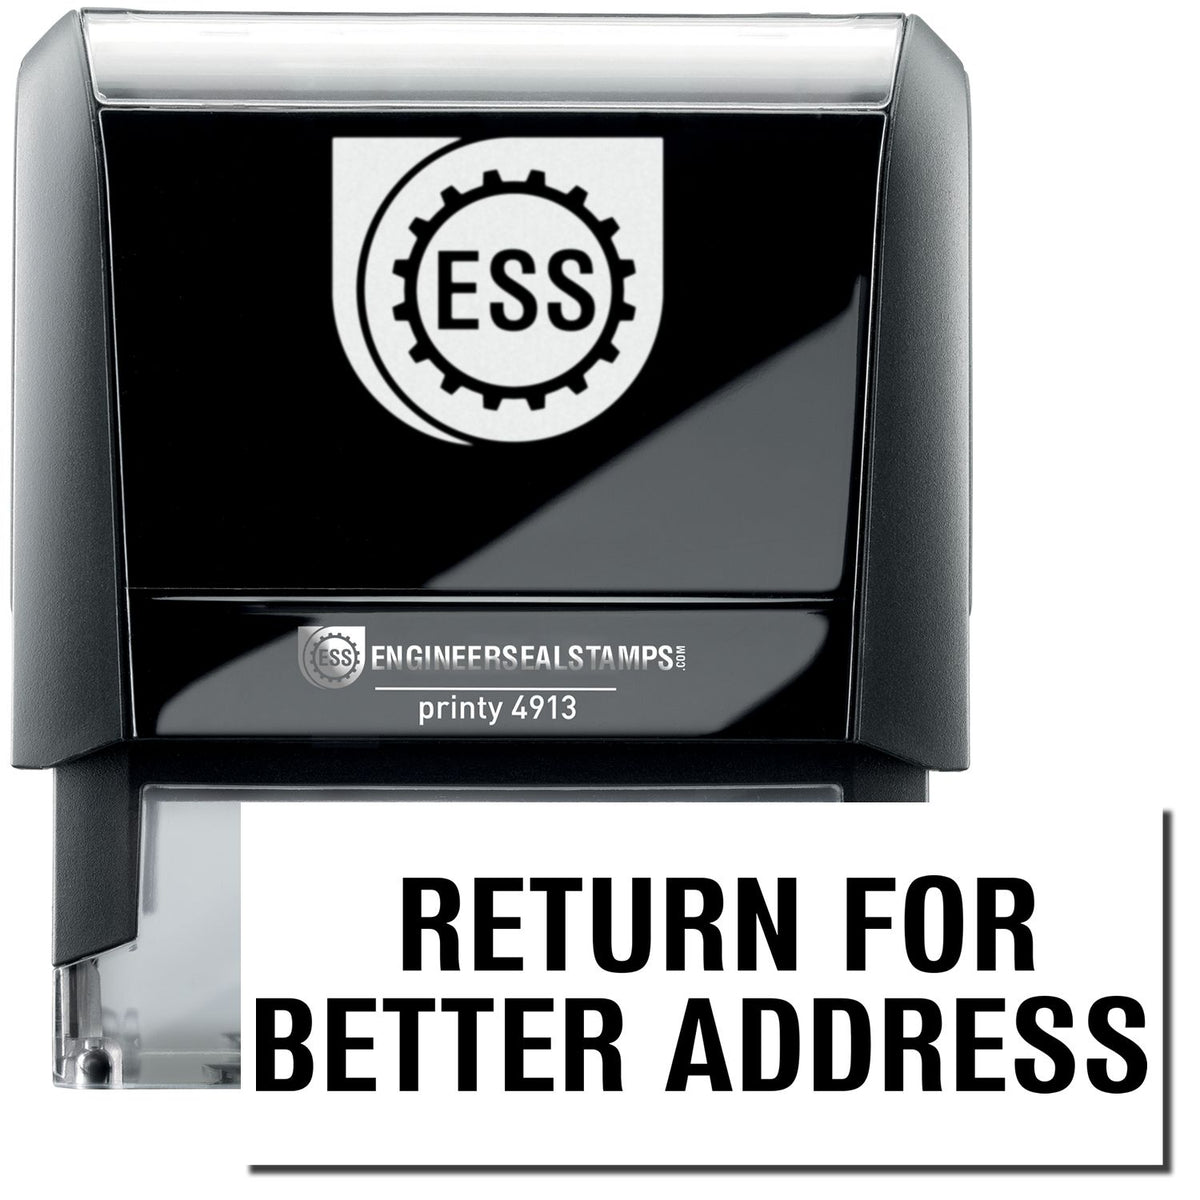 A self-inking stamp with a stamped image showing how the text &quot;RETURN FOR BETTER ADDRESS&quot; in a large font is displayed by it after stamping.